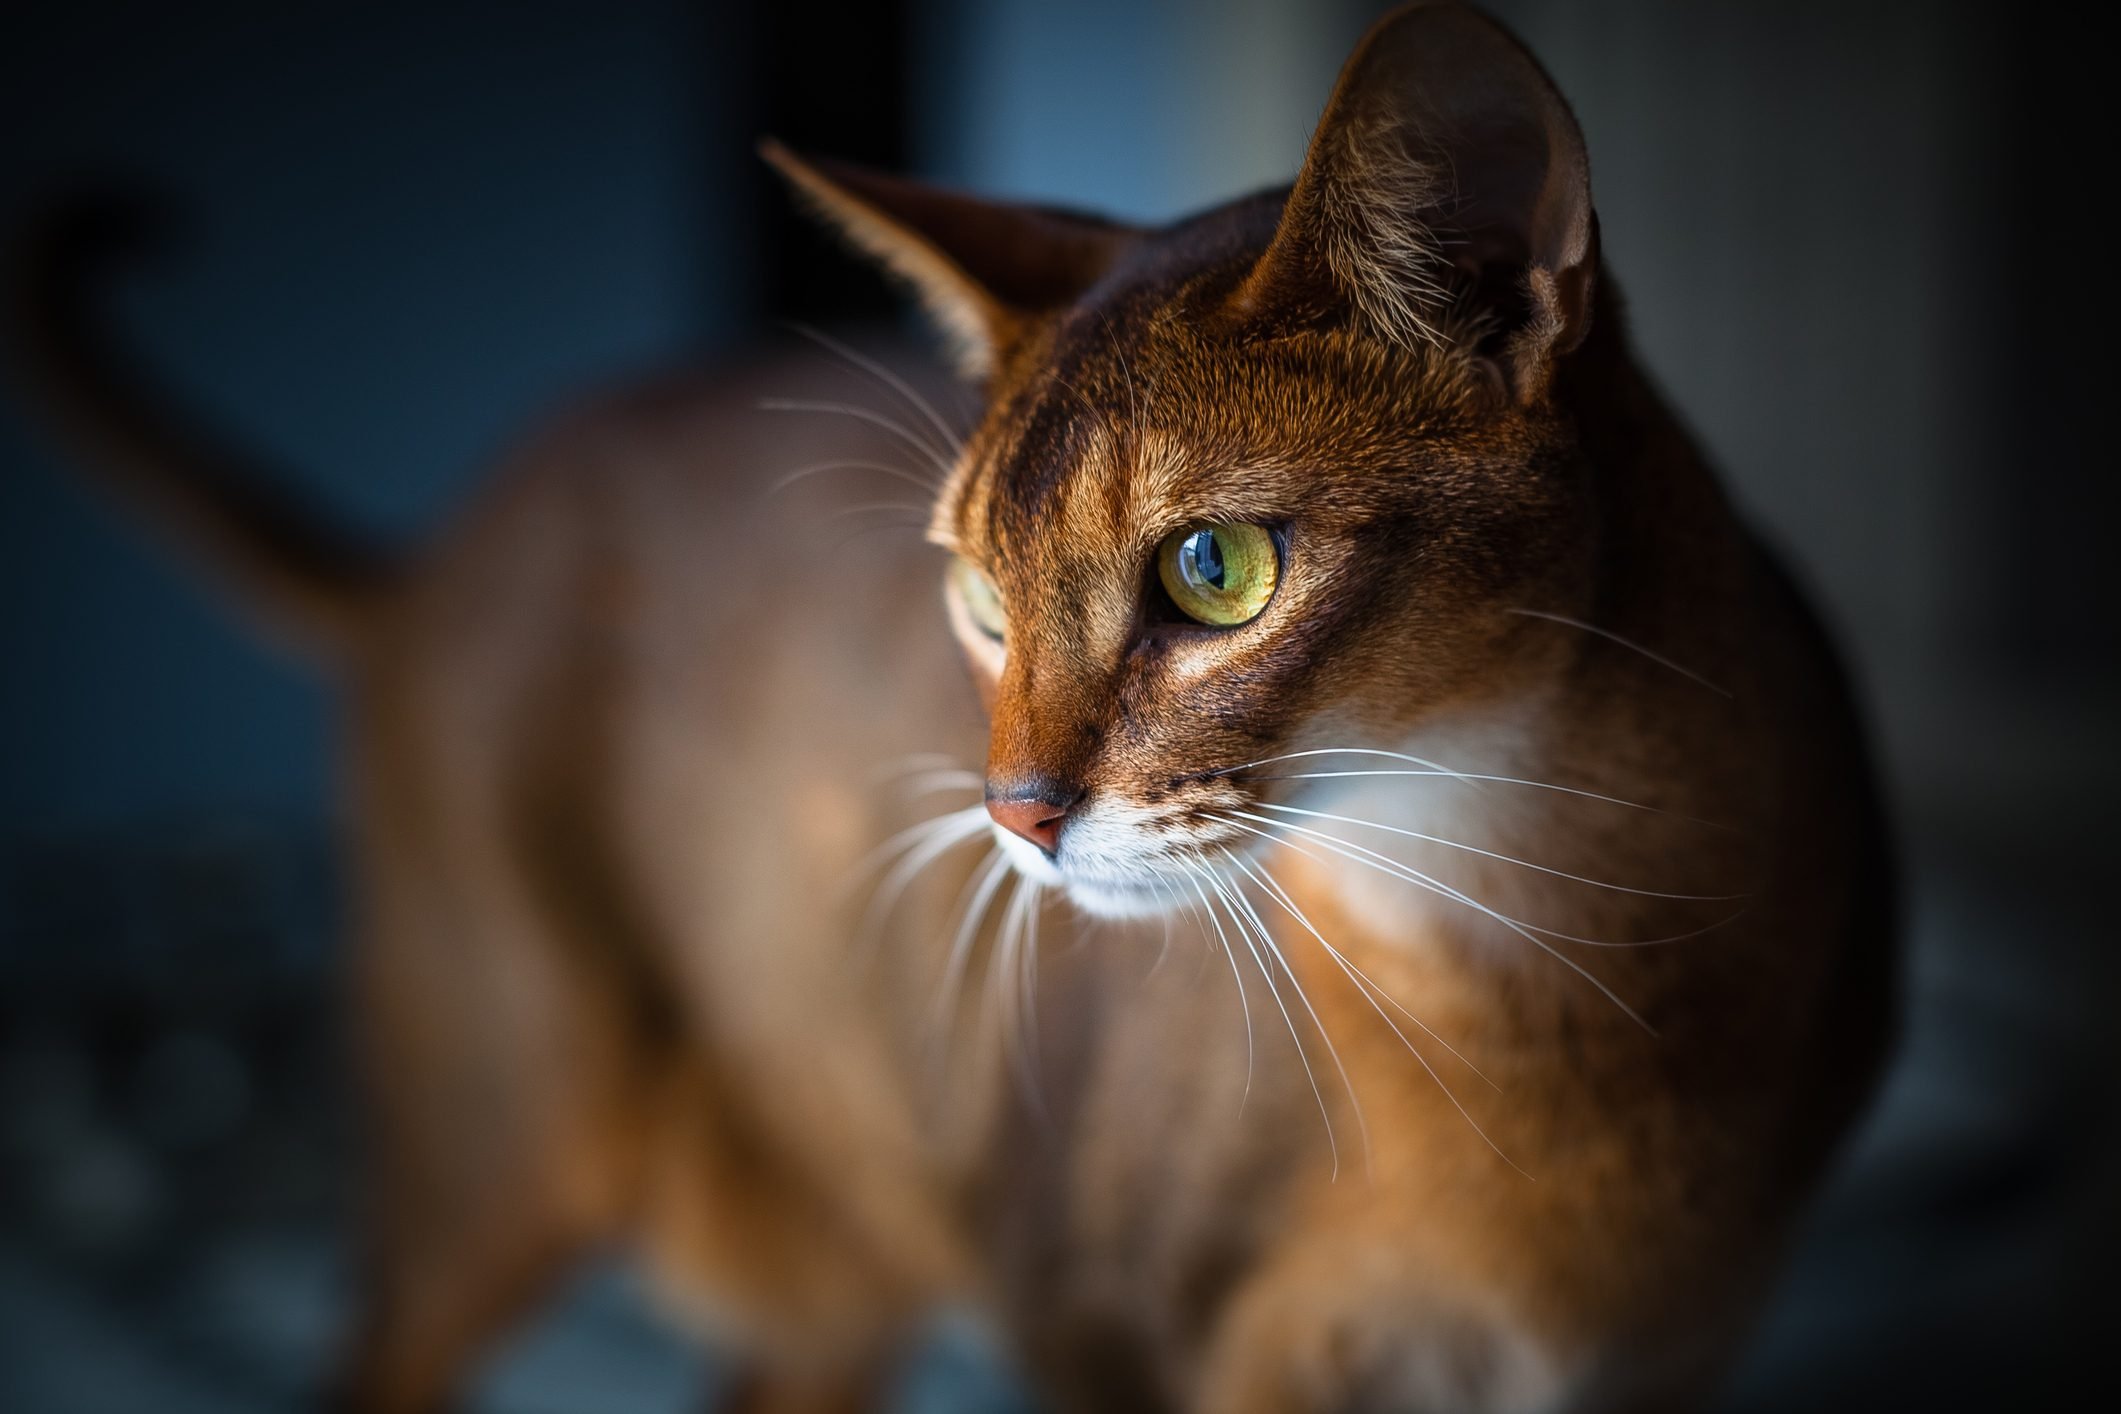 Two-year-old ruddy male Abyssinian cat